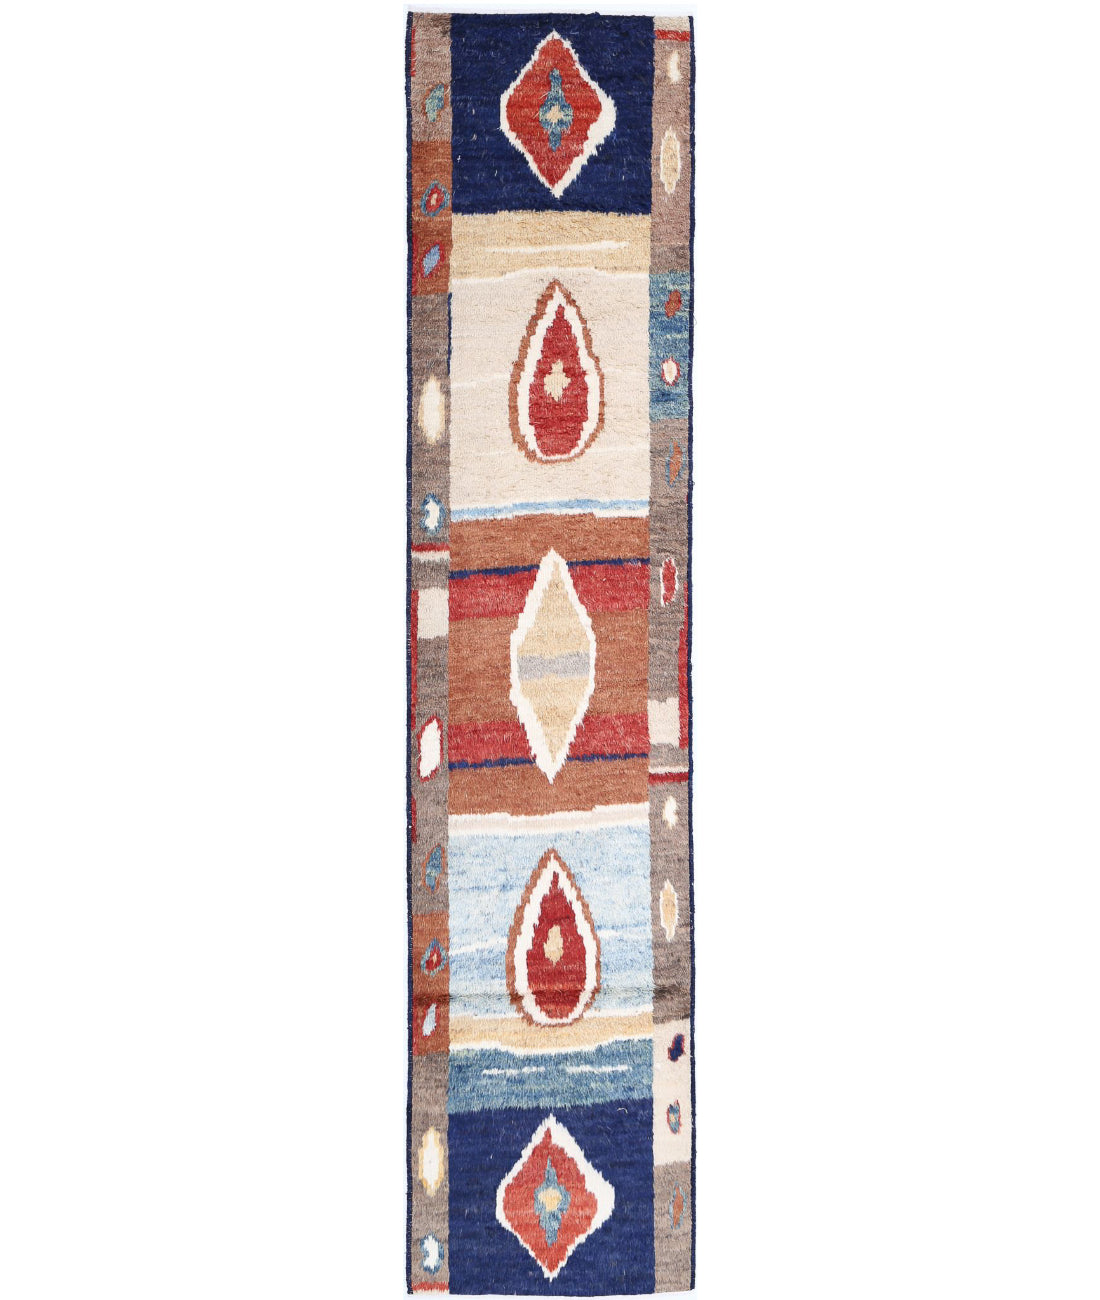 Hand Knotted Tribal Moroccan Wool Rug - 2'9'' x 13'10'' 2'9'' x 13'10'' (83 X 415) / Blue / Red